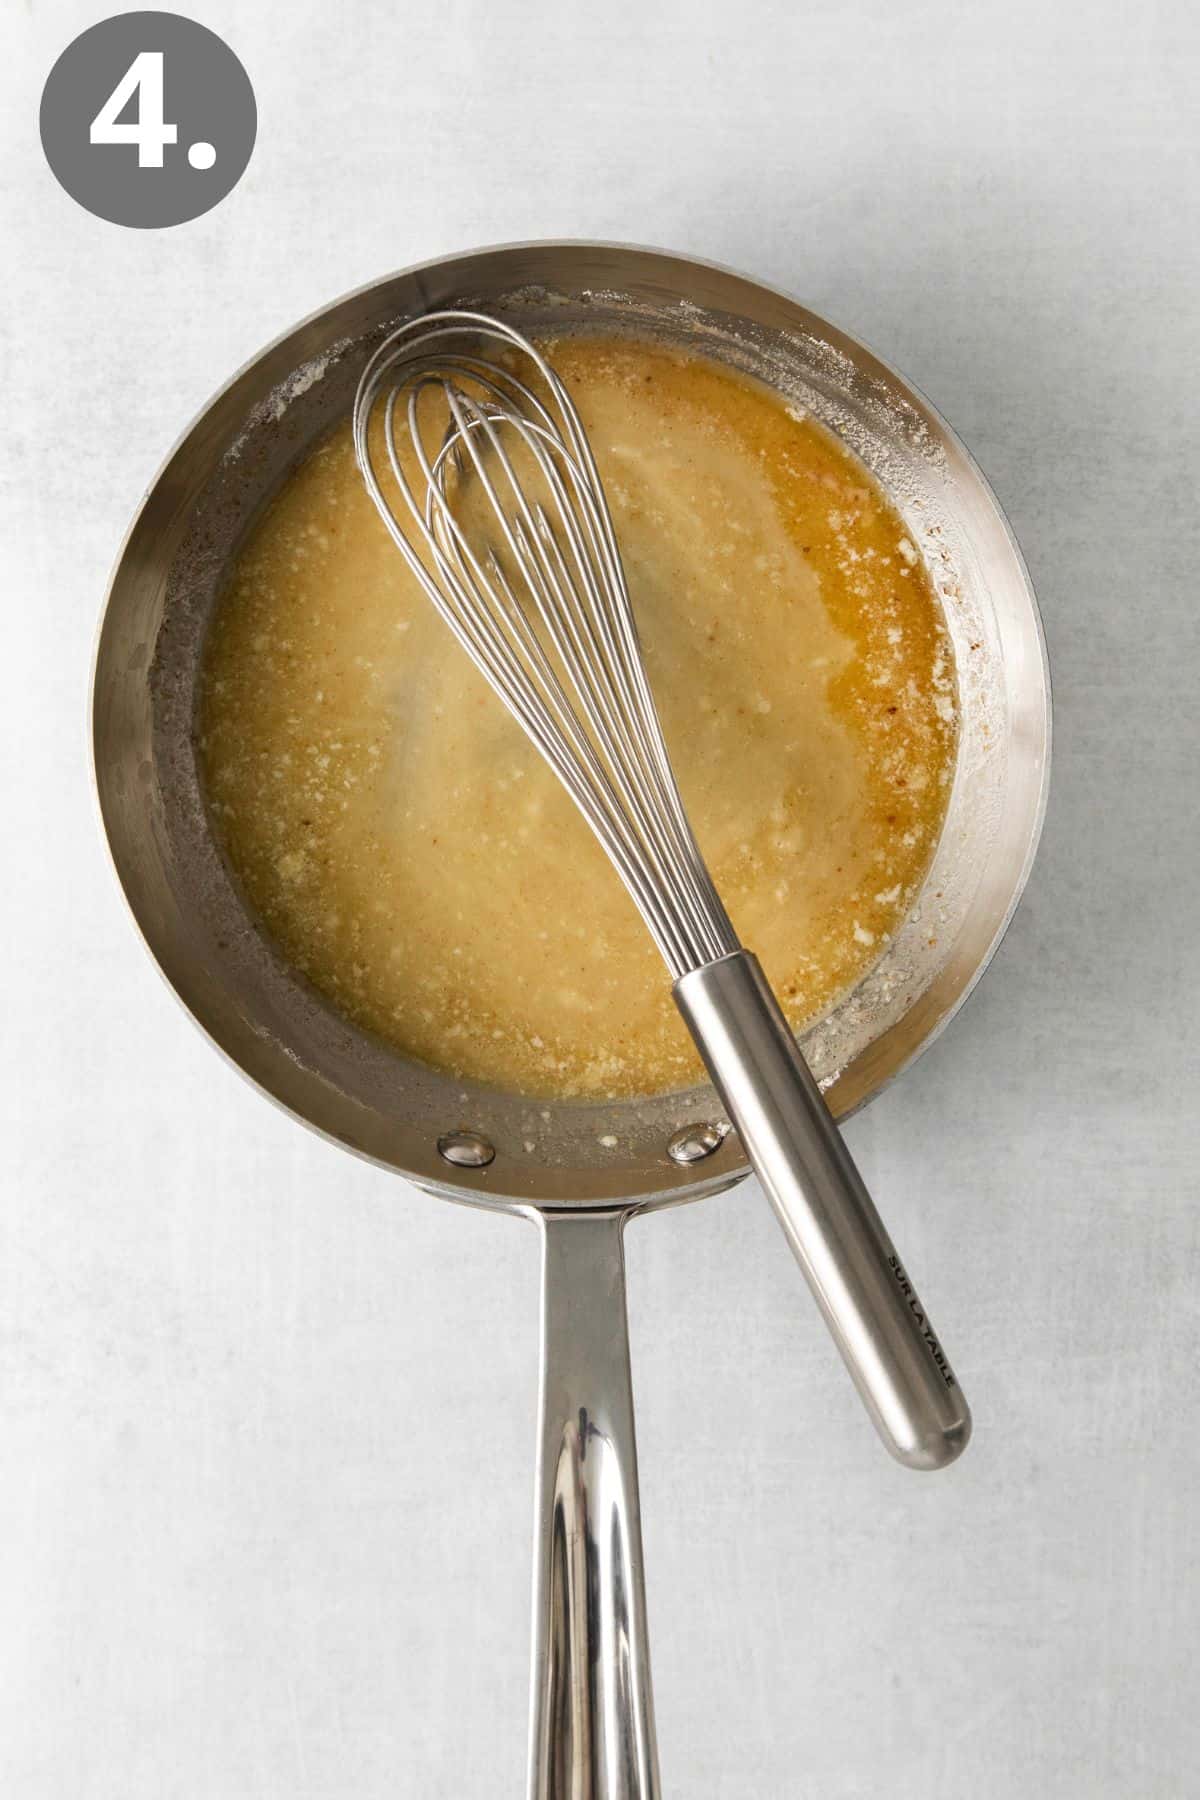 Melted butter and flour in a skillet